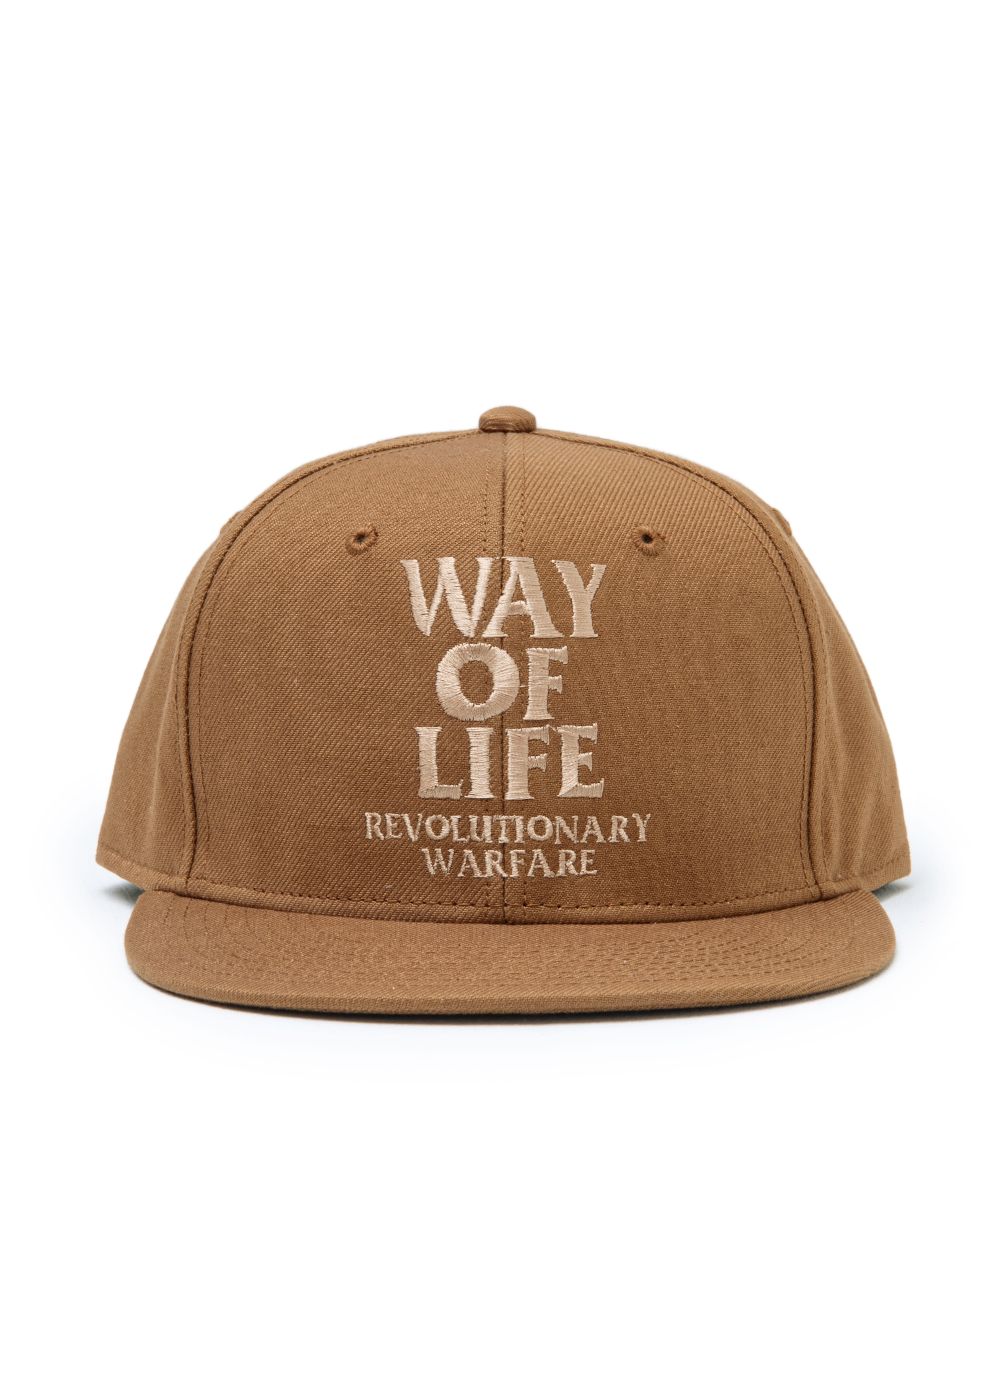 Rats Embroidery Cap WAY OF LIFE Navy